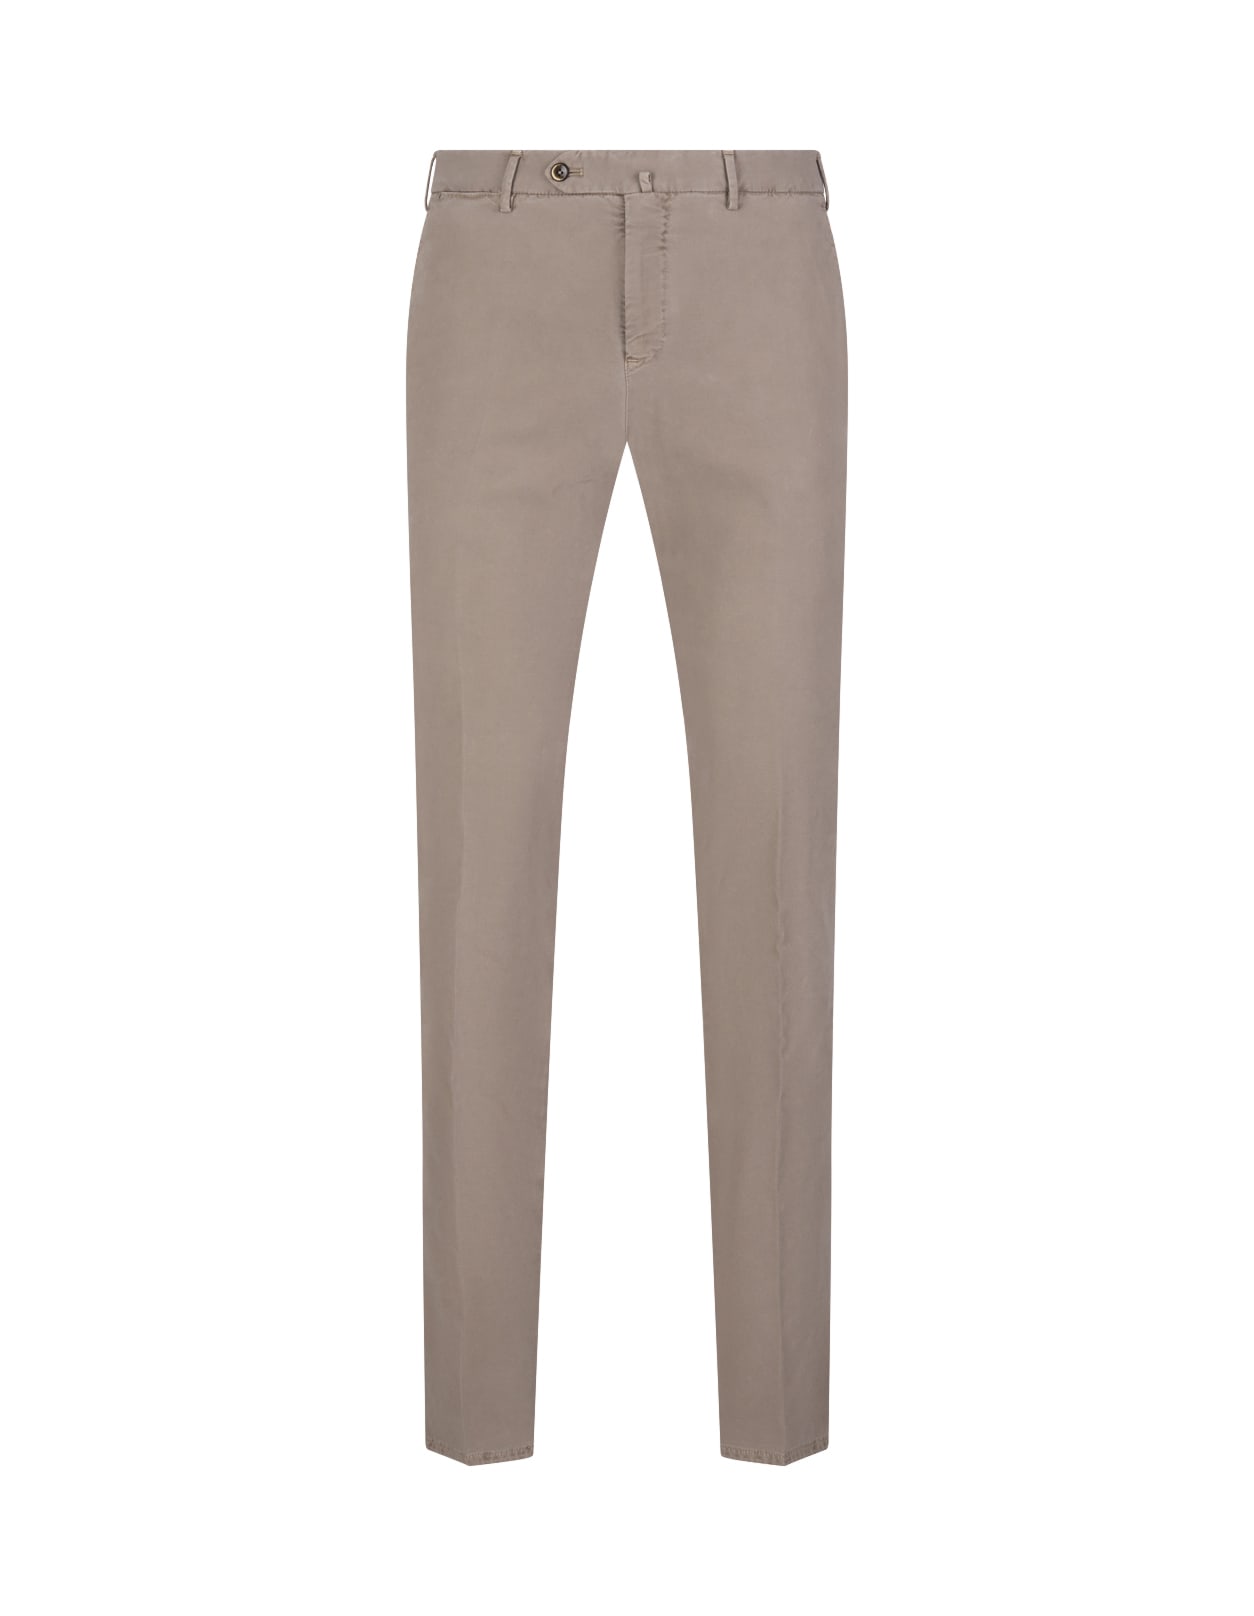 PT01 Man Slim Fit Trousers In Sand Stretch Technical Cotton